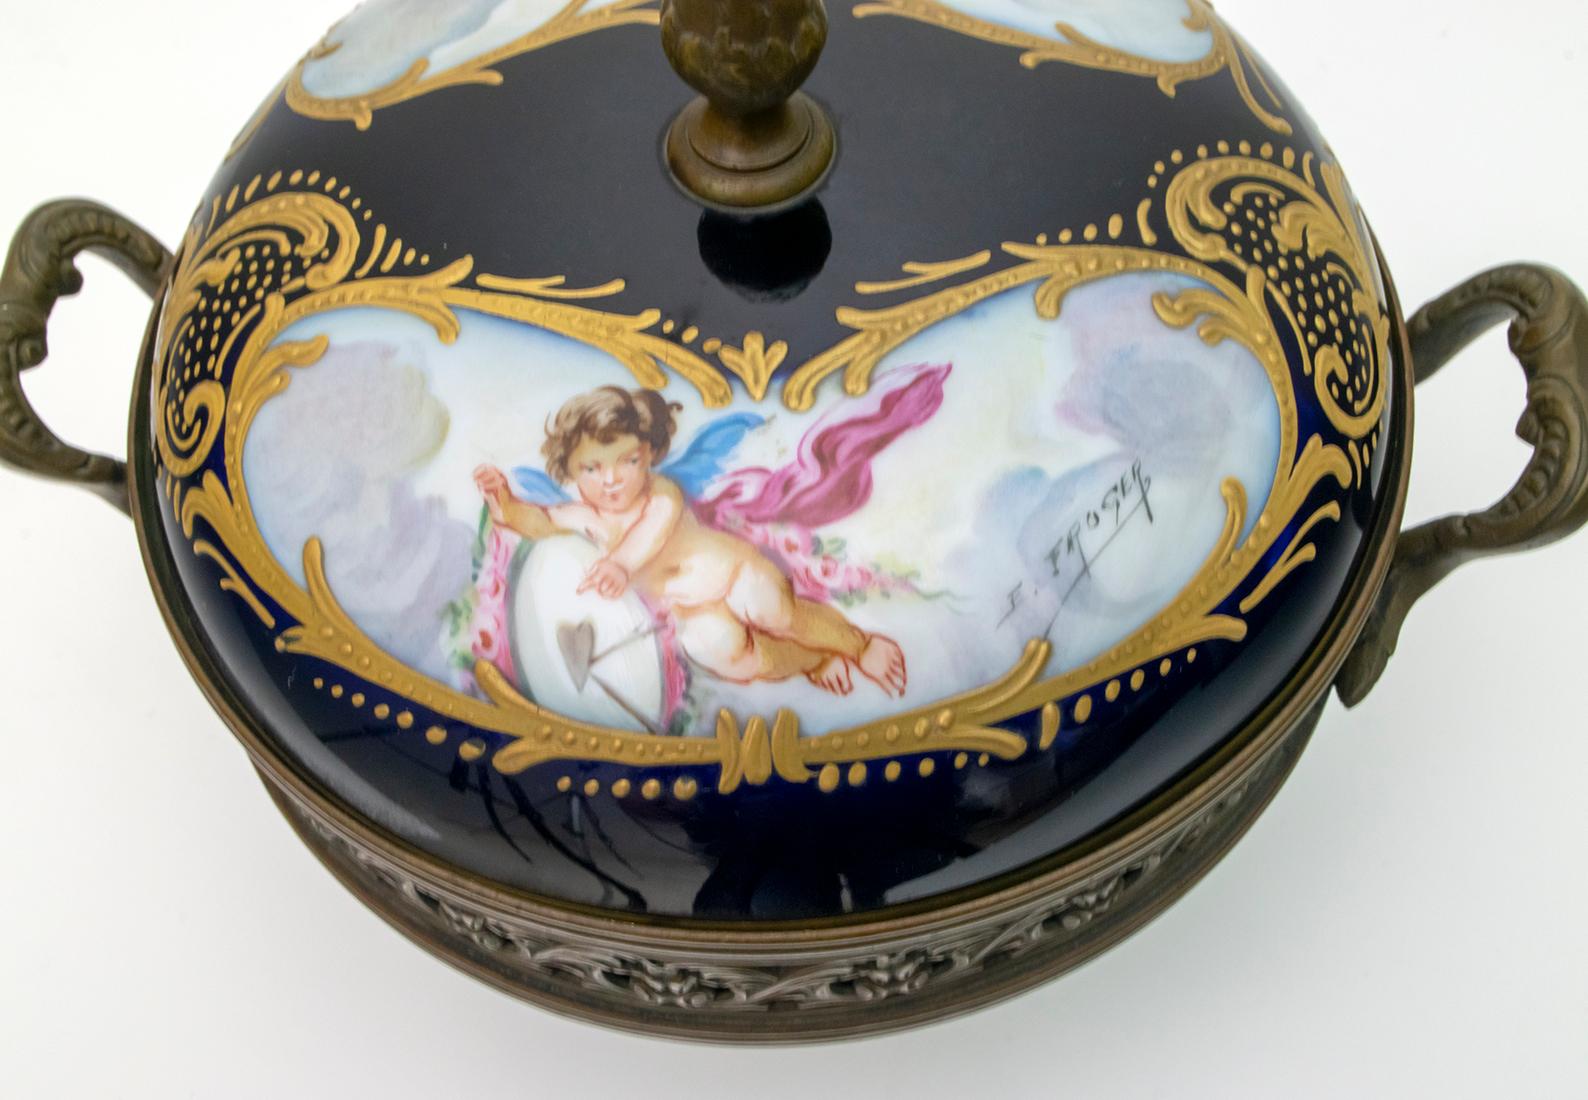 Signed E. Froger 19th Century French Porcelain Potpourri by Sevres, 1880 For Sale 1